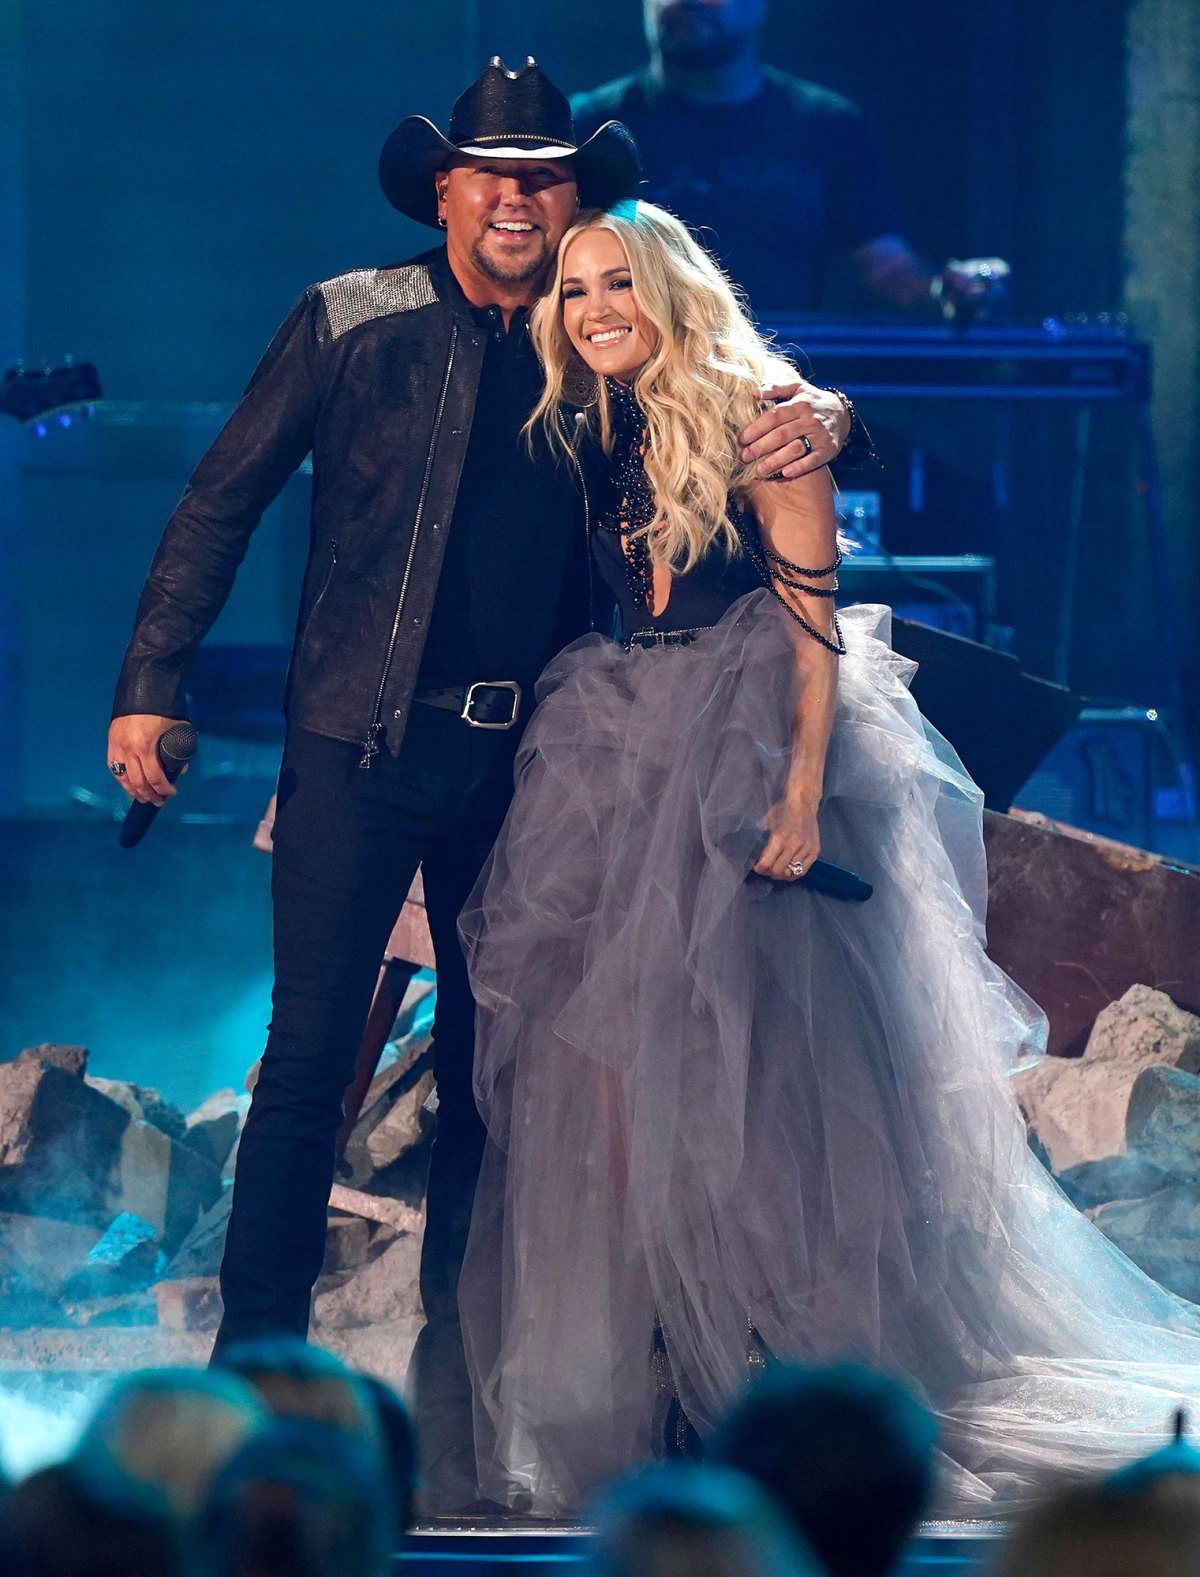 Duet! Carrie Underwood, Jason Aldean Perform at the CMAs News and Gossip